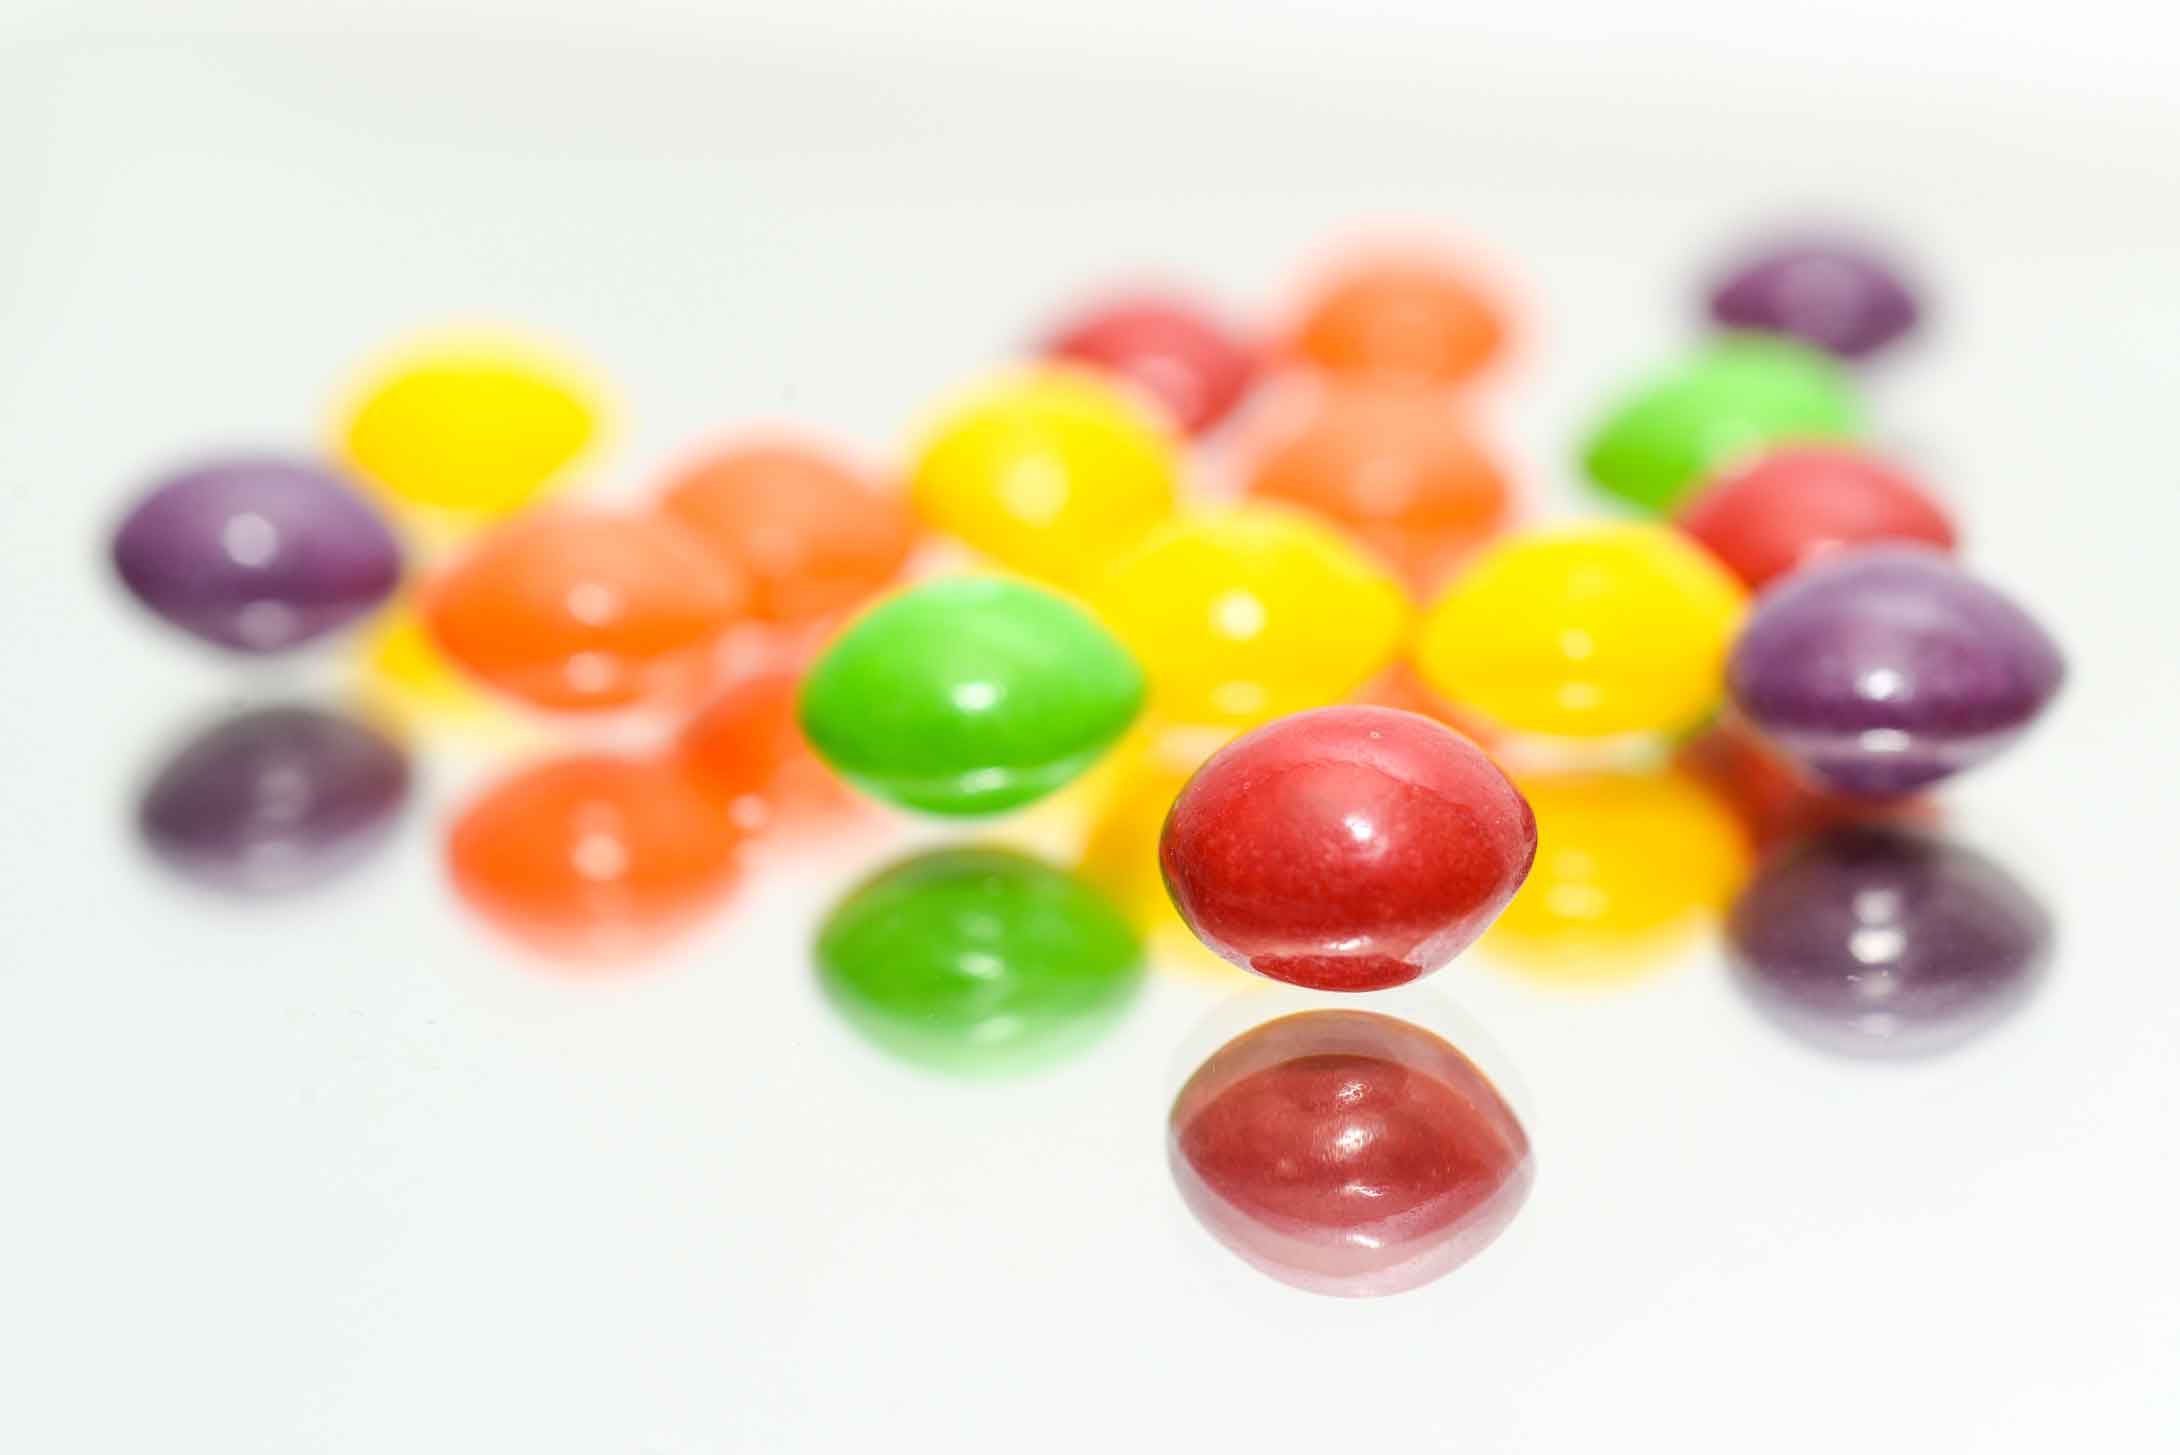 a bunch of skittles candy on a table